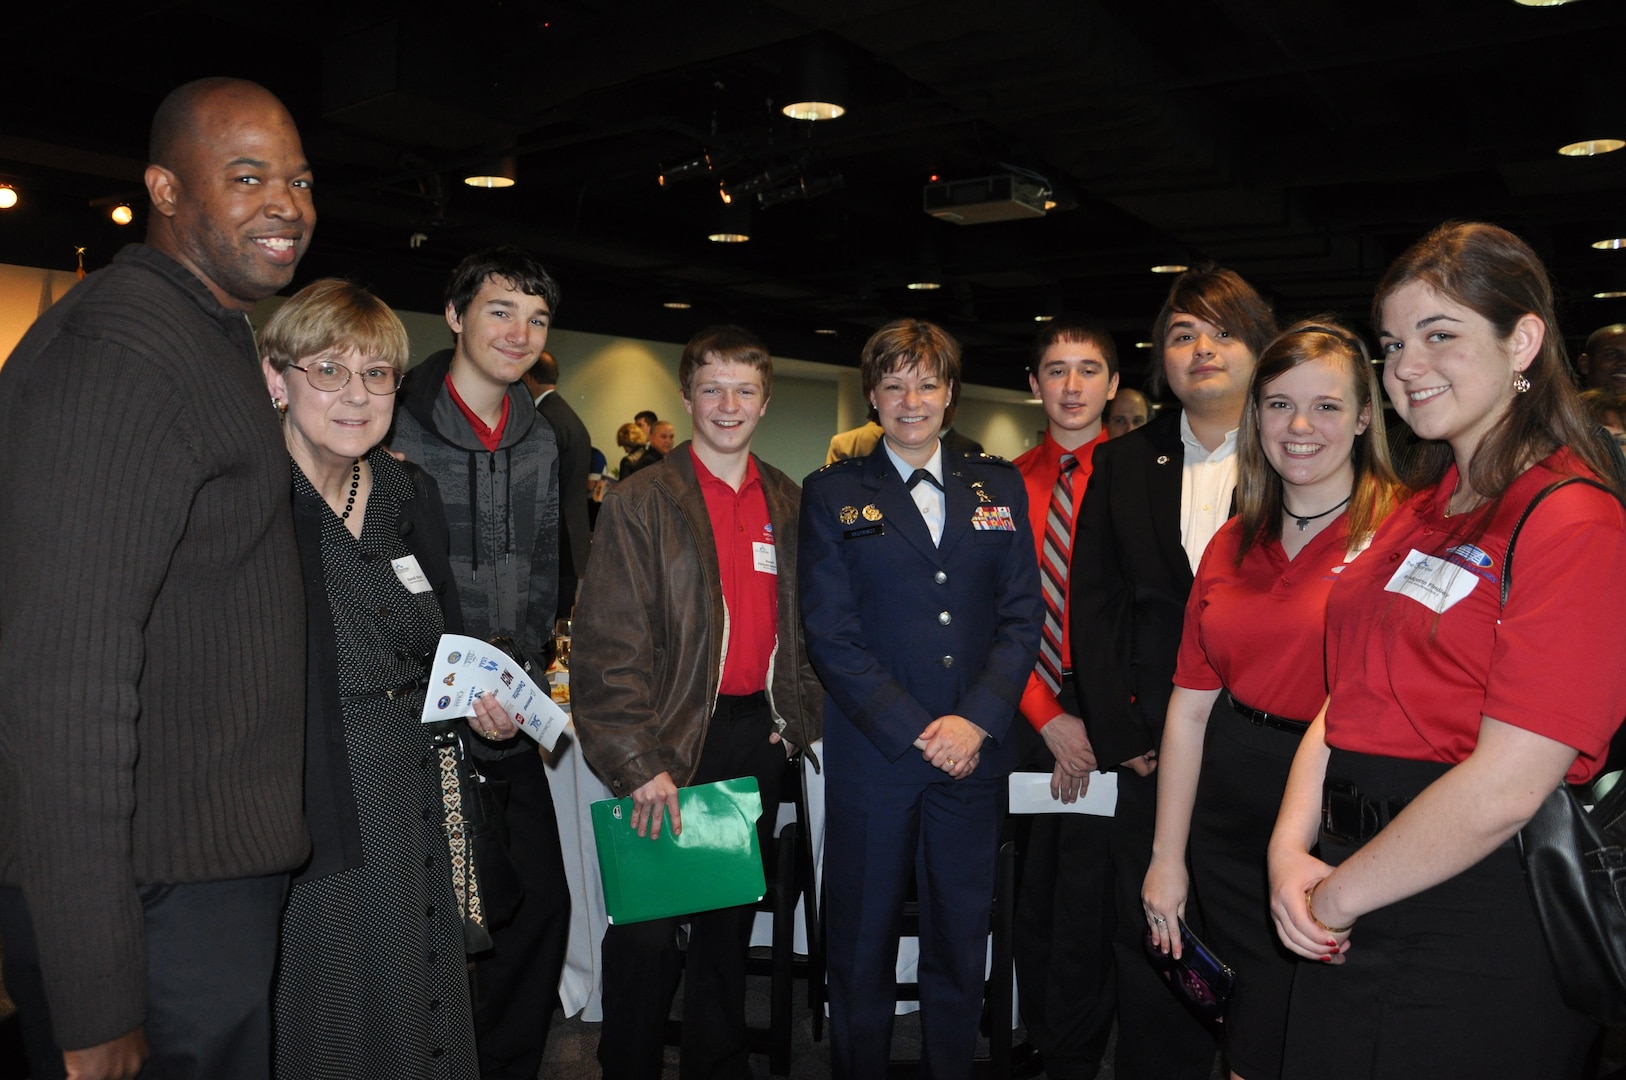 SAN ANTONIO -- Members of the CyberPatriot team from the Information Technology Security Academy stop for a picture with Maj. Gen. Suzanne Vautrinot, 24th Air Force commander, after attending the 2nd Annual Mayor's Cyber Cup at the Venues at Valero here Feb. 18. The Mayor's Cyber Cup luncheon recognized the high school team in San Antonio that has performed the best in the national CyberPatriot competition as well as the thirty-six high school teams in San Antonio that have participated in the competition. (U.S. Air Force photo by Lt. Col. Cynthia East)